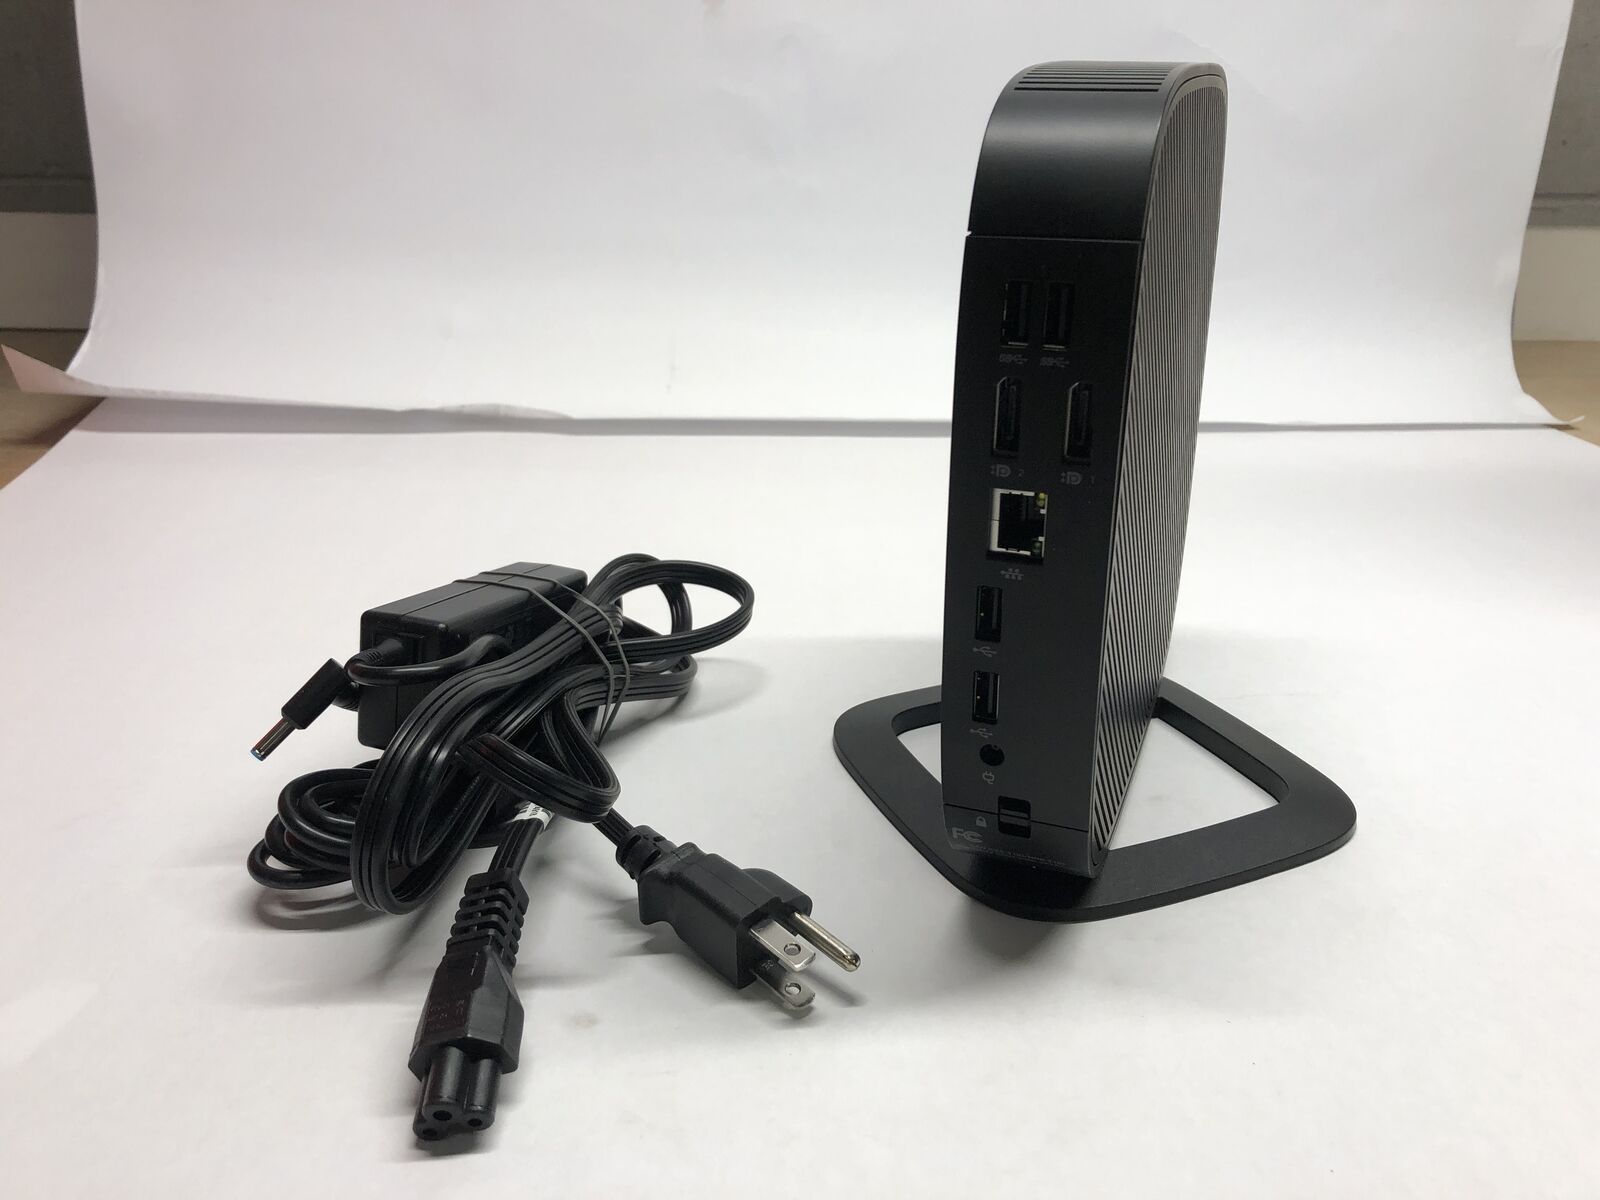 Lot of 2 HP T530 Thin Client Computer GX-215JJ 4GB Ram 8GB SSD W Stand Cable No